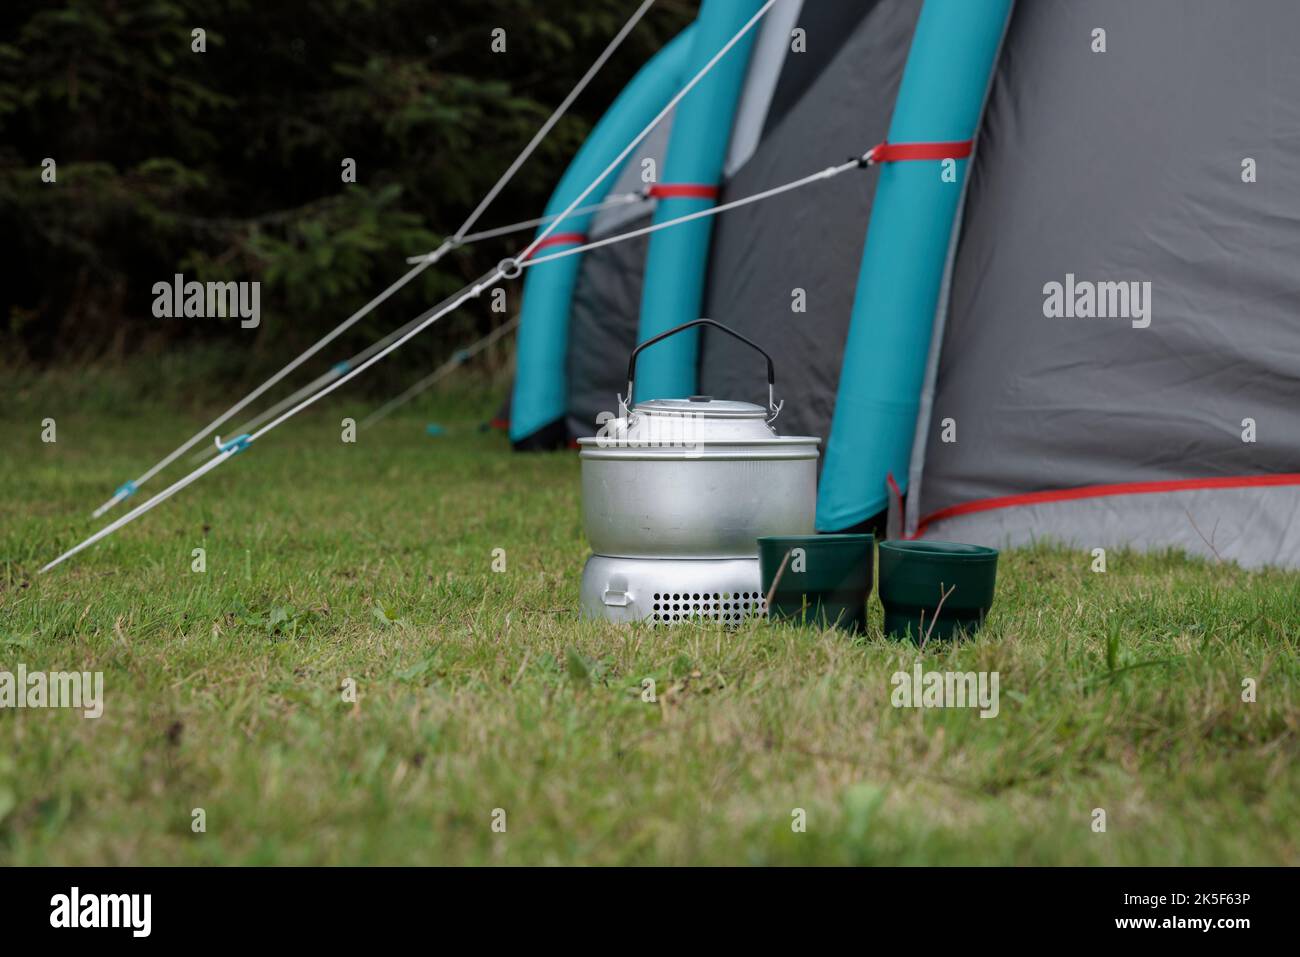 Camp stove, cups and tent. Stock Photo